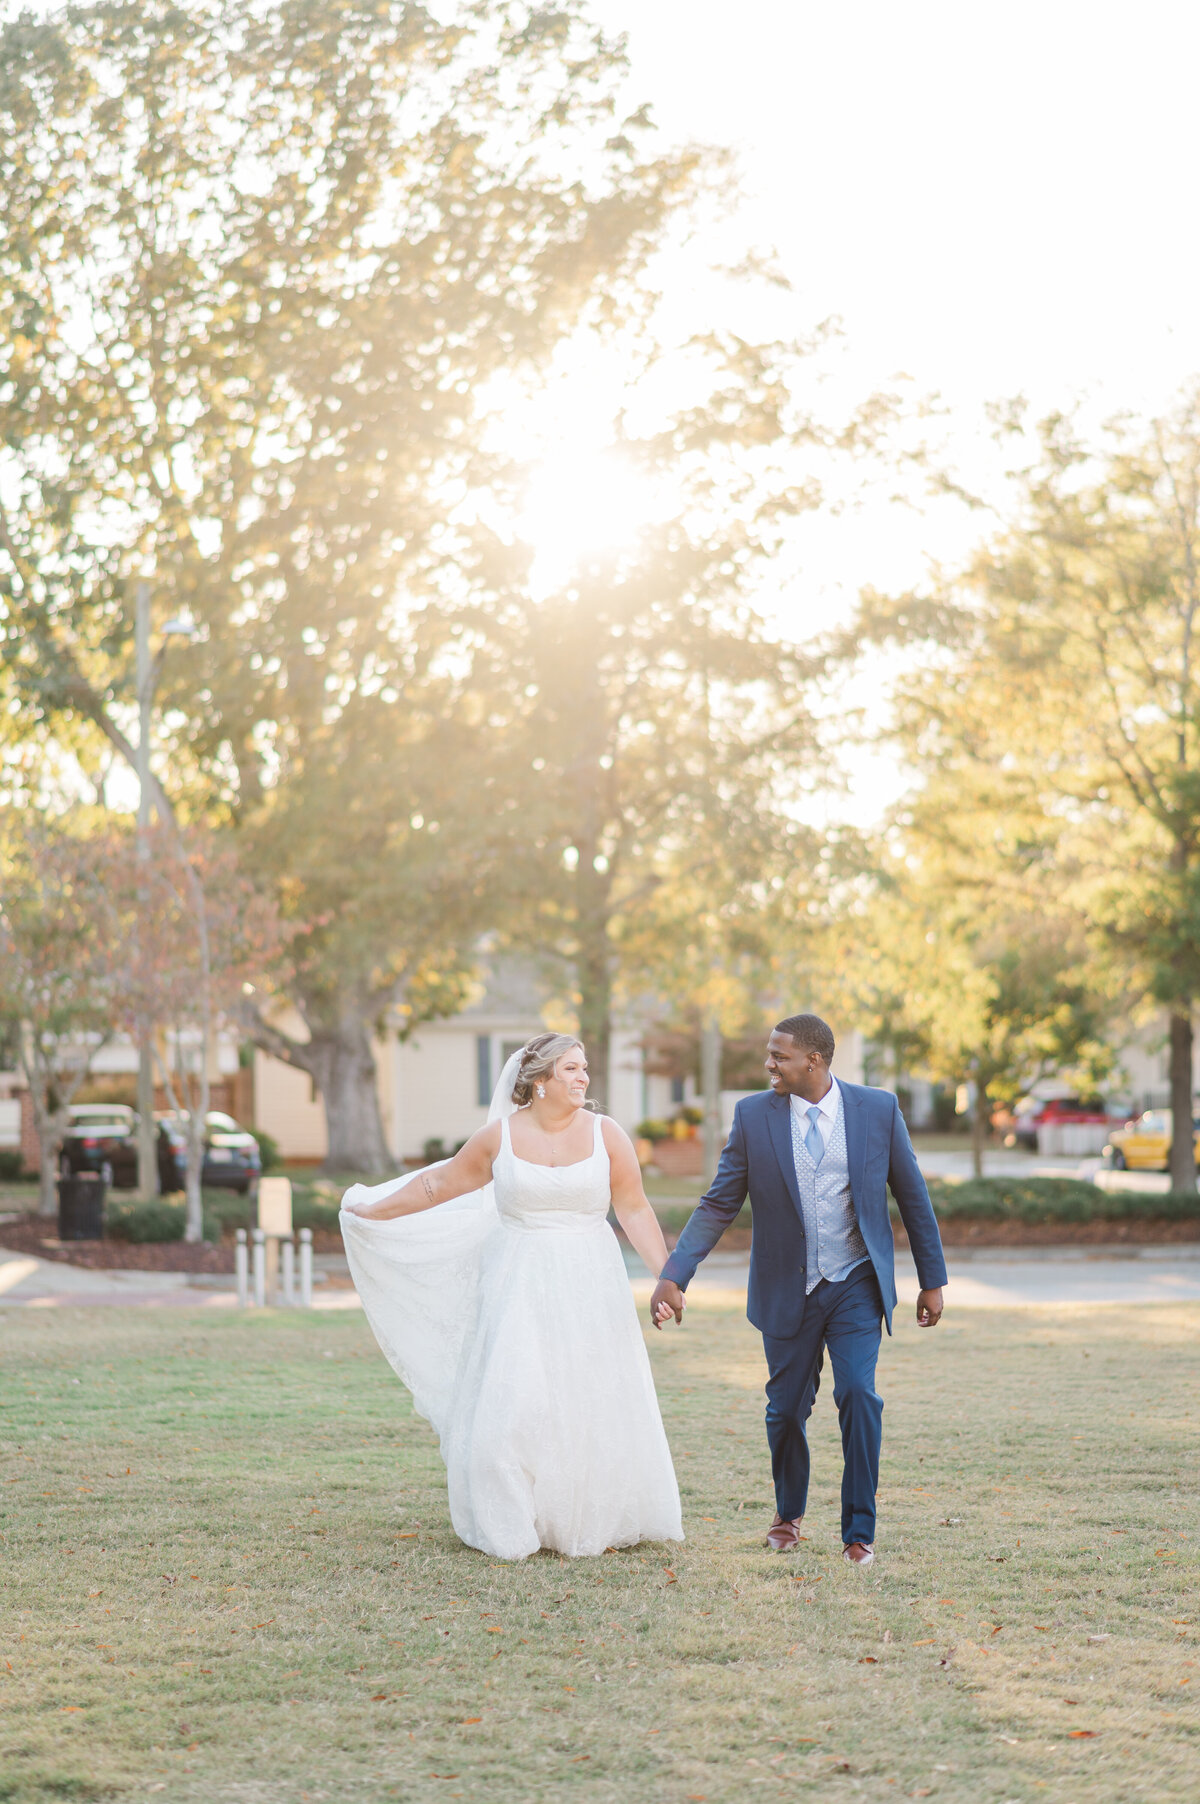 Couple having a great time on their wedding day in downtown wilmington